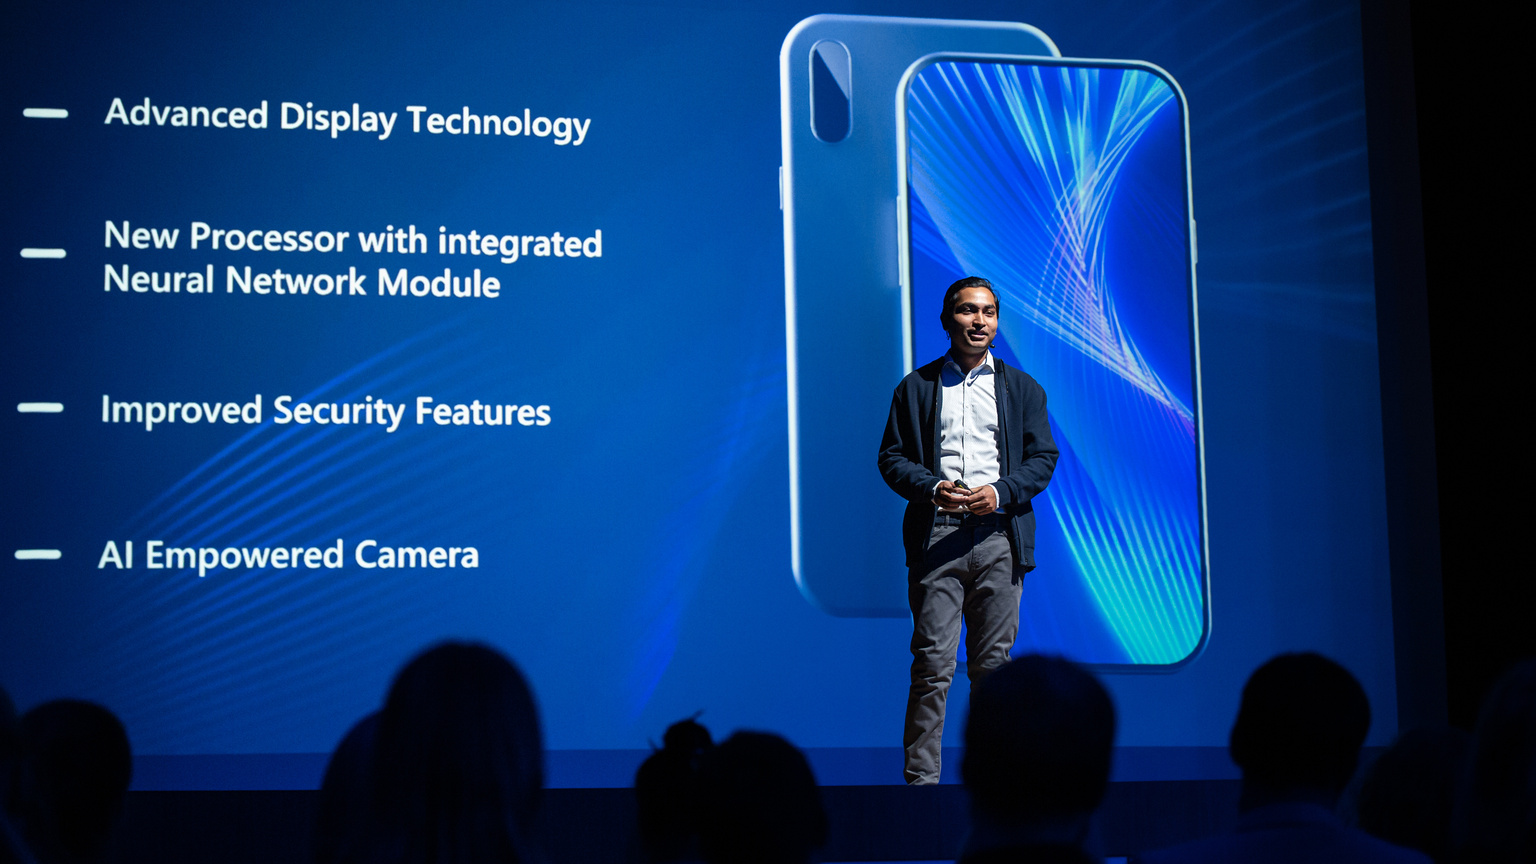 Live Event with New Products Reveal: Keynote Speaker Presents Smartphone Device to Audience. Movie Theater Screen Shows Mock-up Touch Screen Mobile Phone with High End Features and Top Highlights